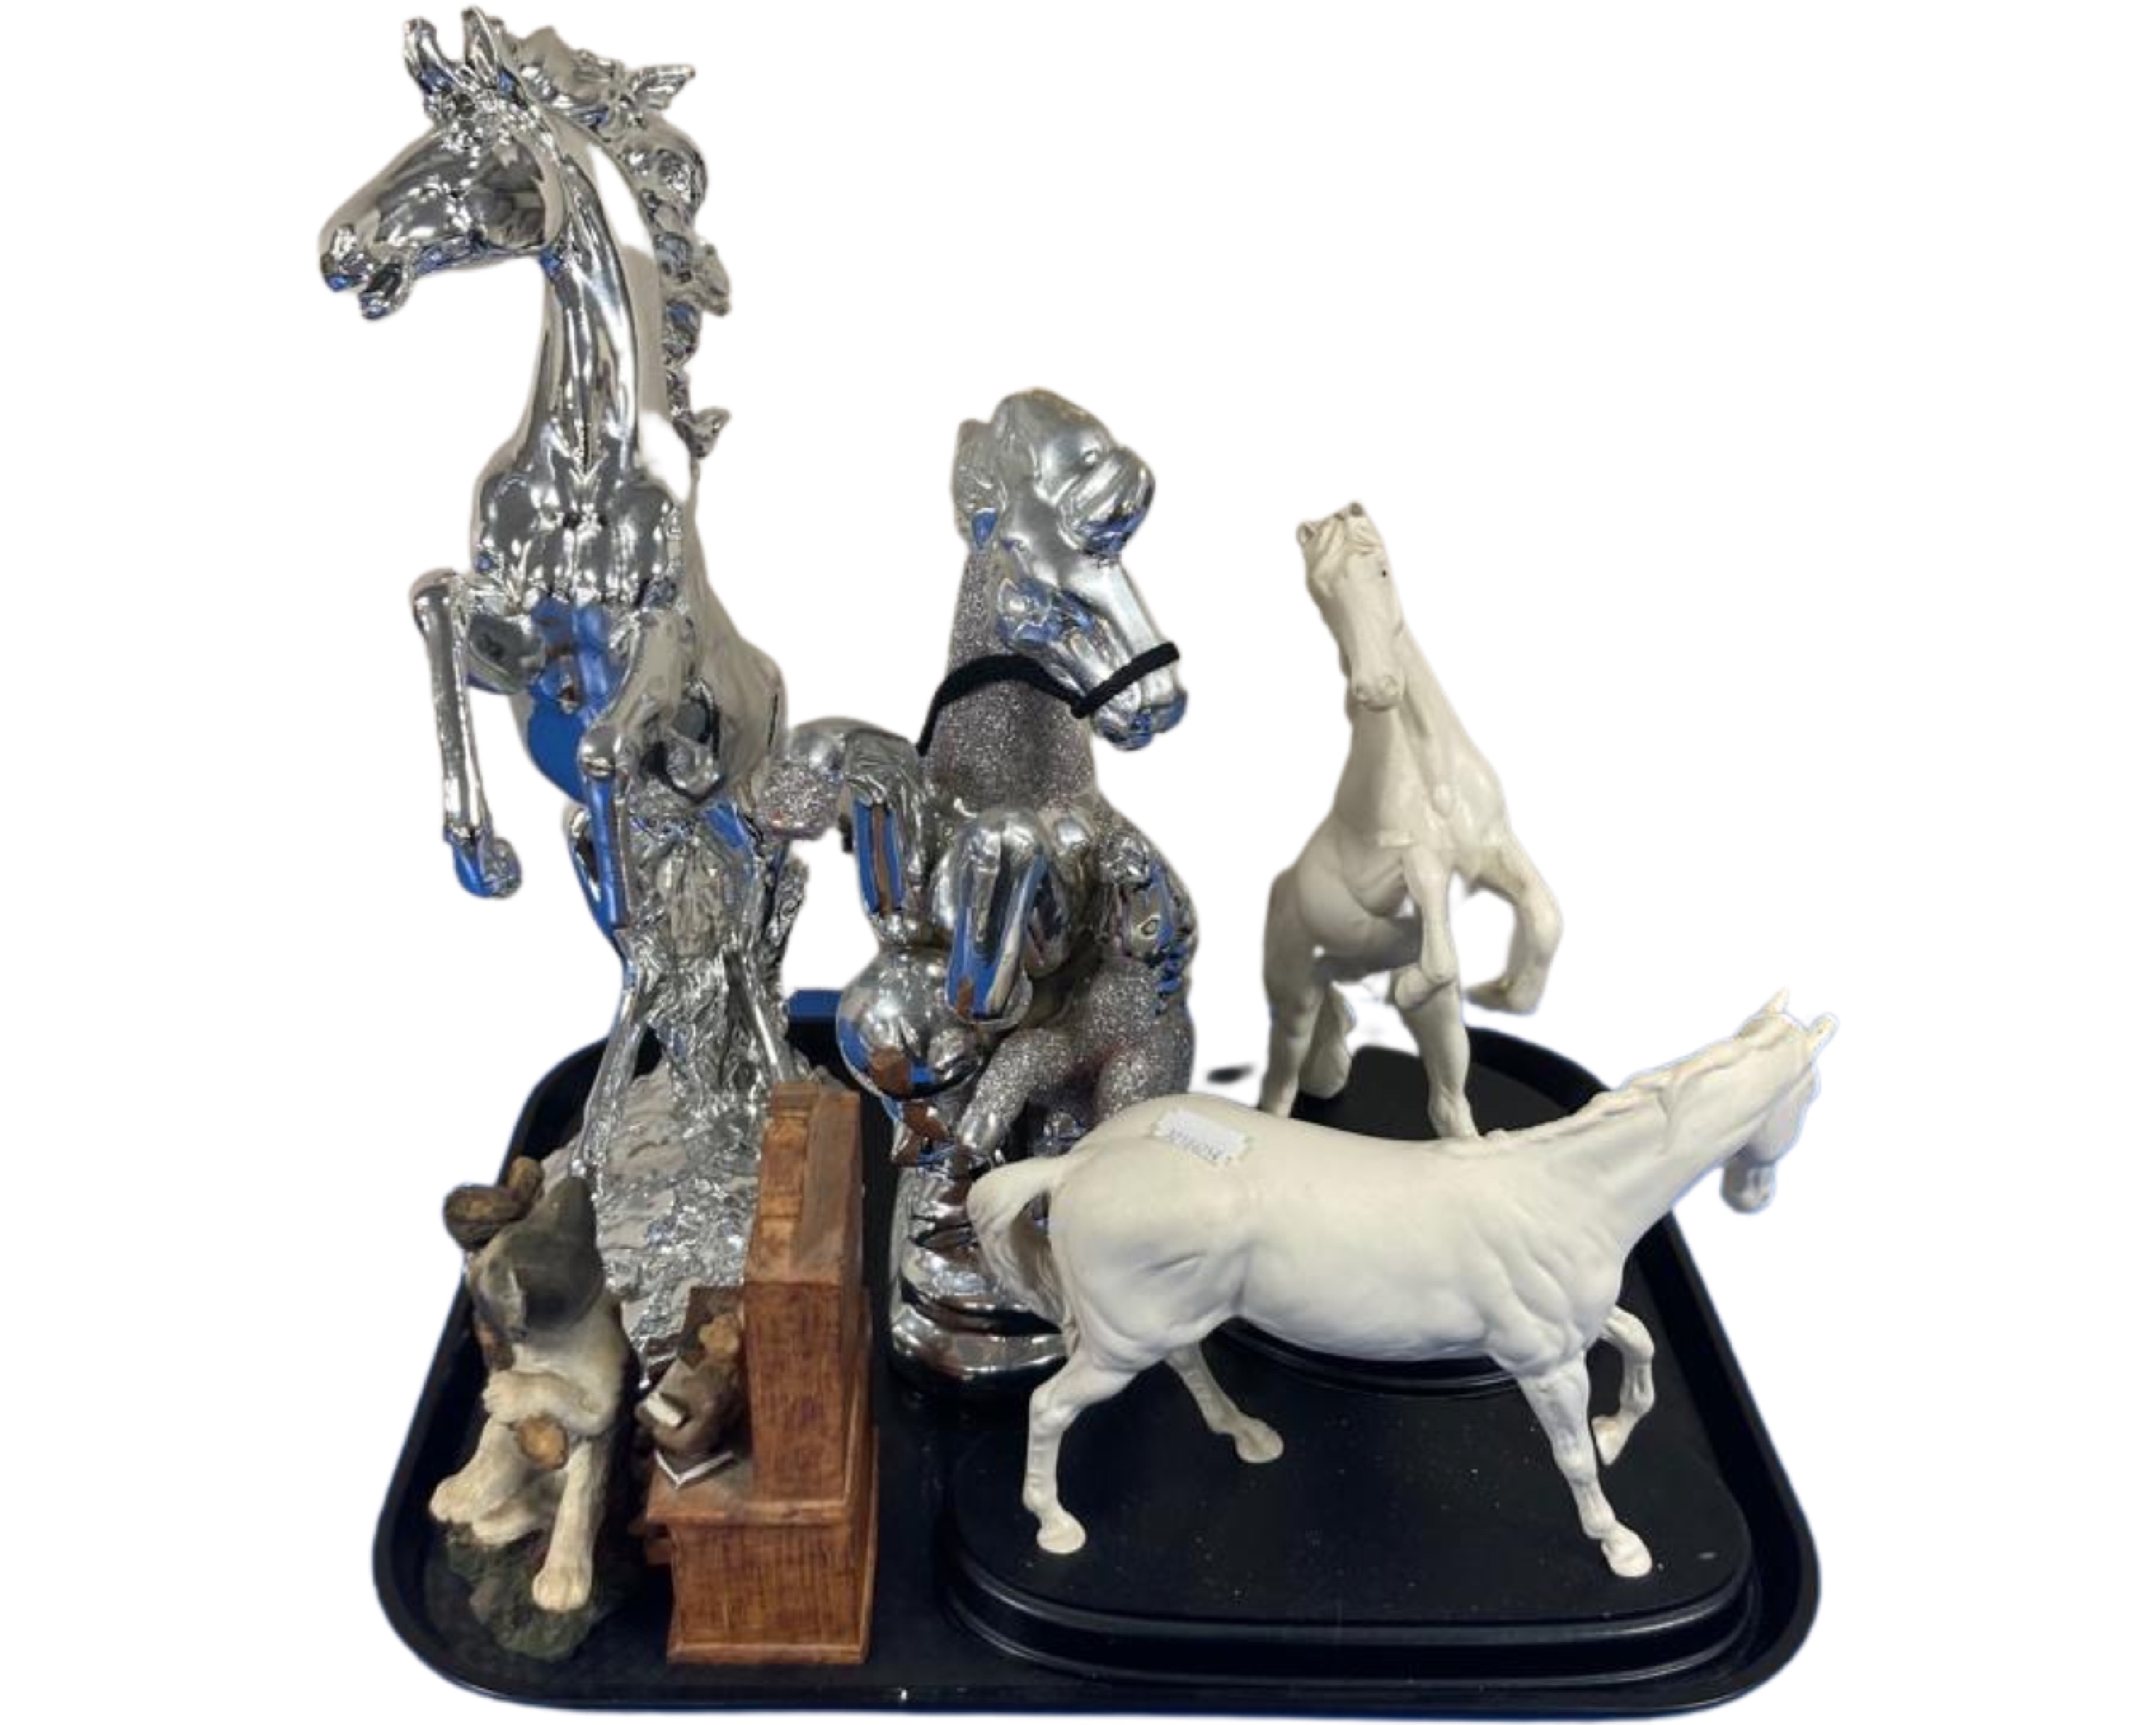 Two Royal Doulton horse figures on plinths, Spirit of Youth and Spirit of the Wild,